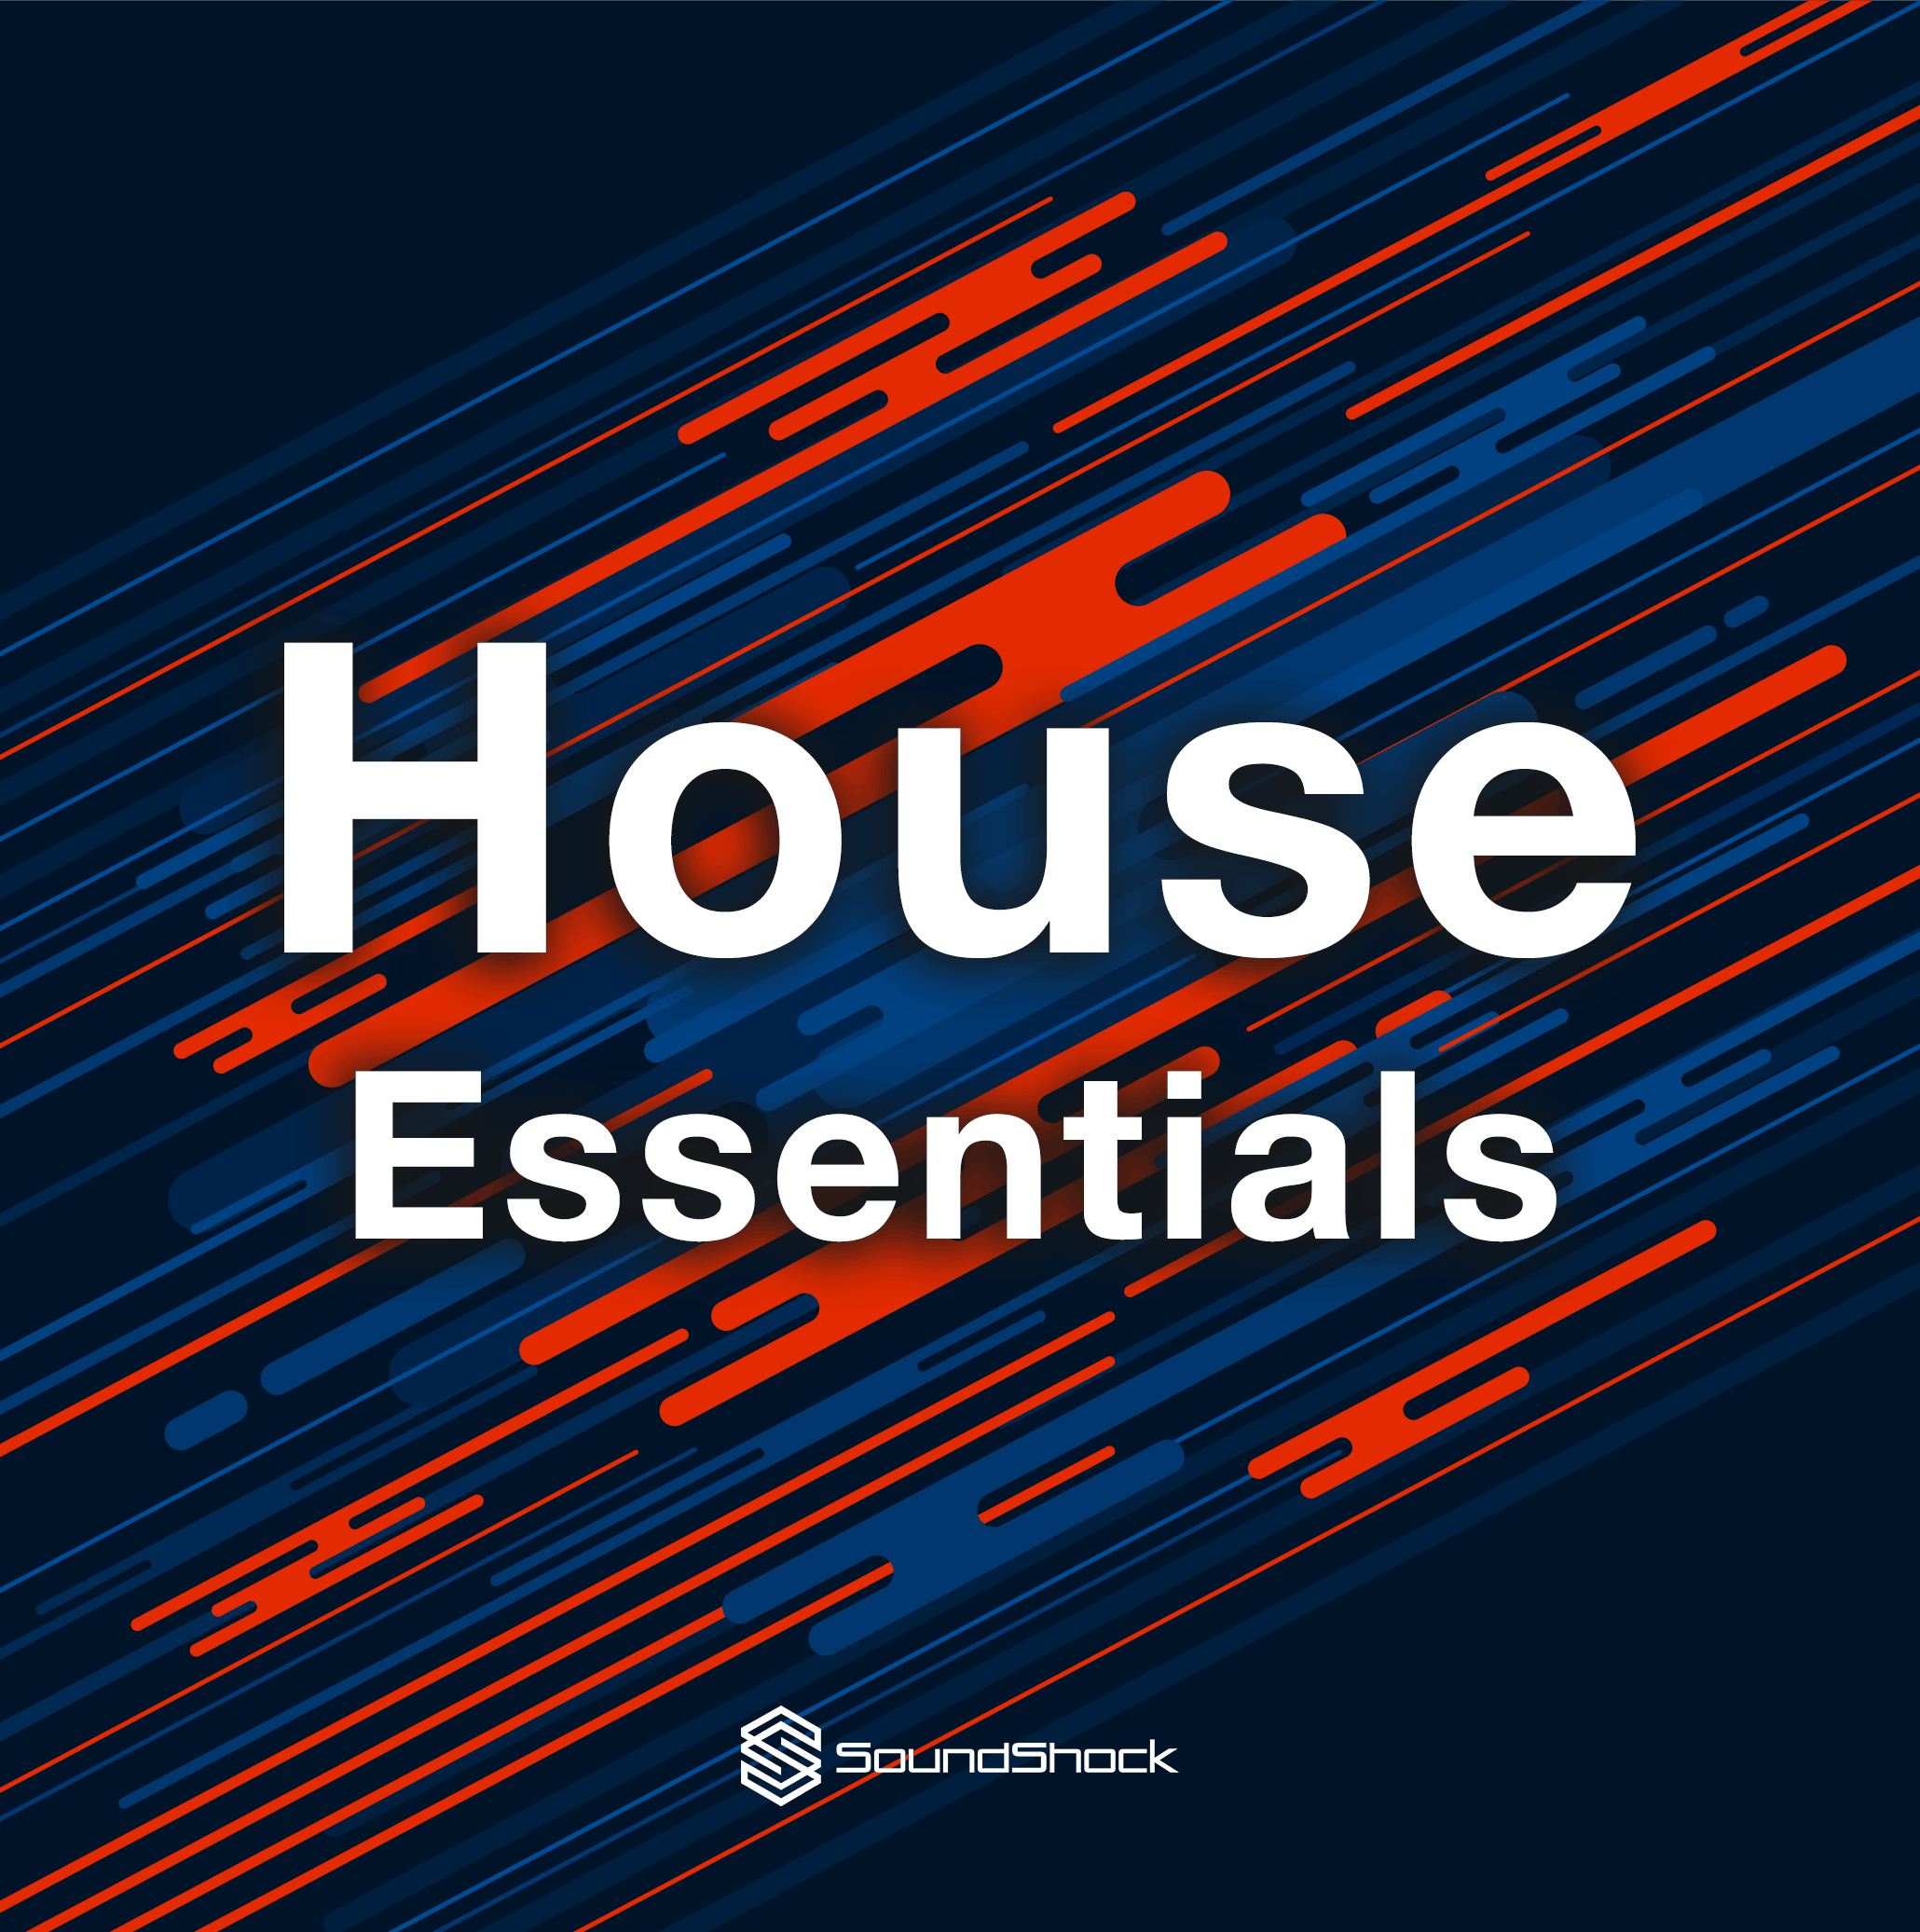 The logo for House Essentials on an orange and blue background.